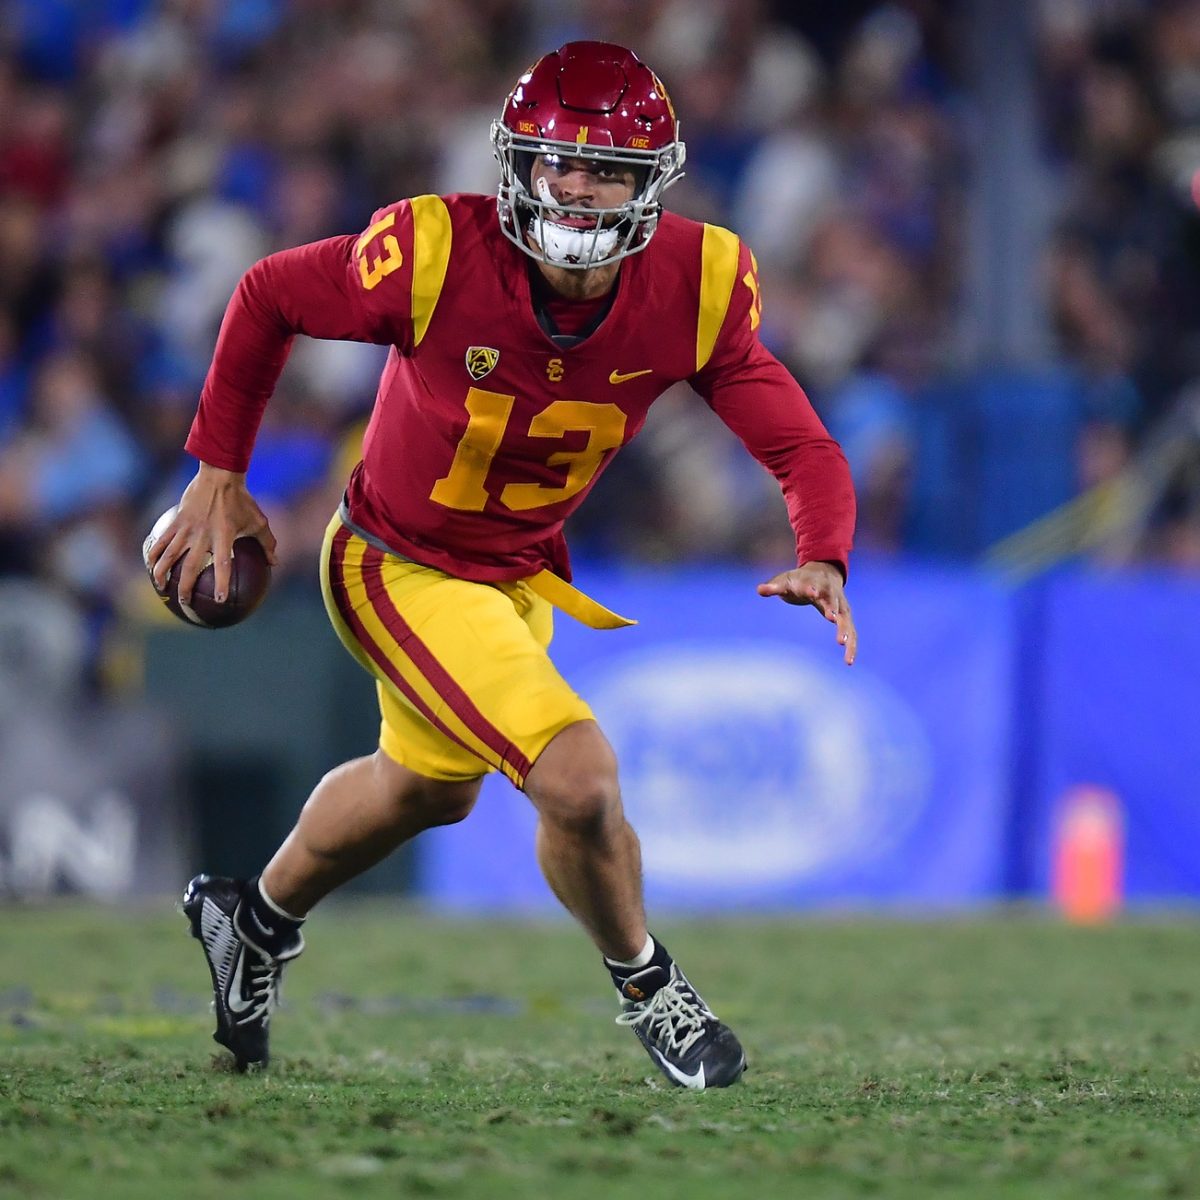 Notre Dame vs. Southern California (USC) Prediction, Preview, and Odds – 11-26-2022